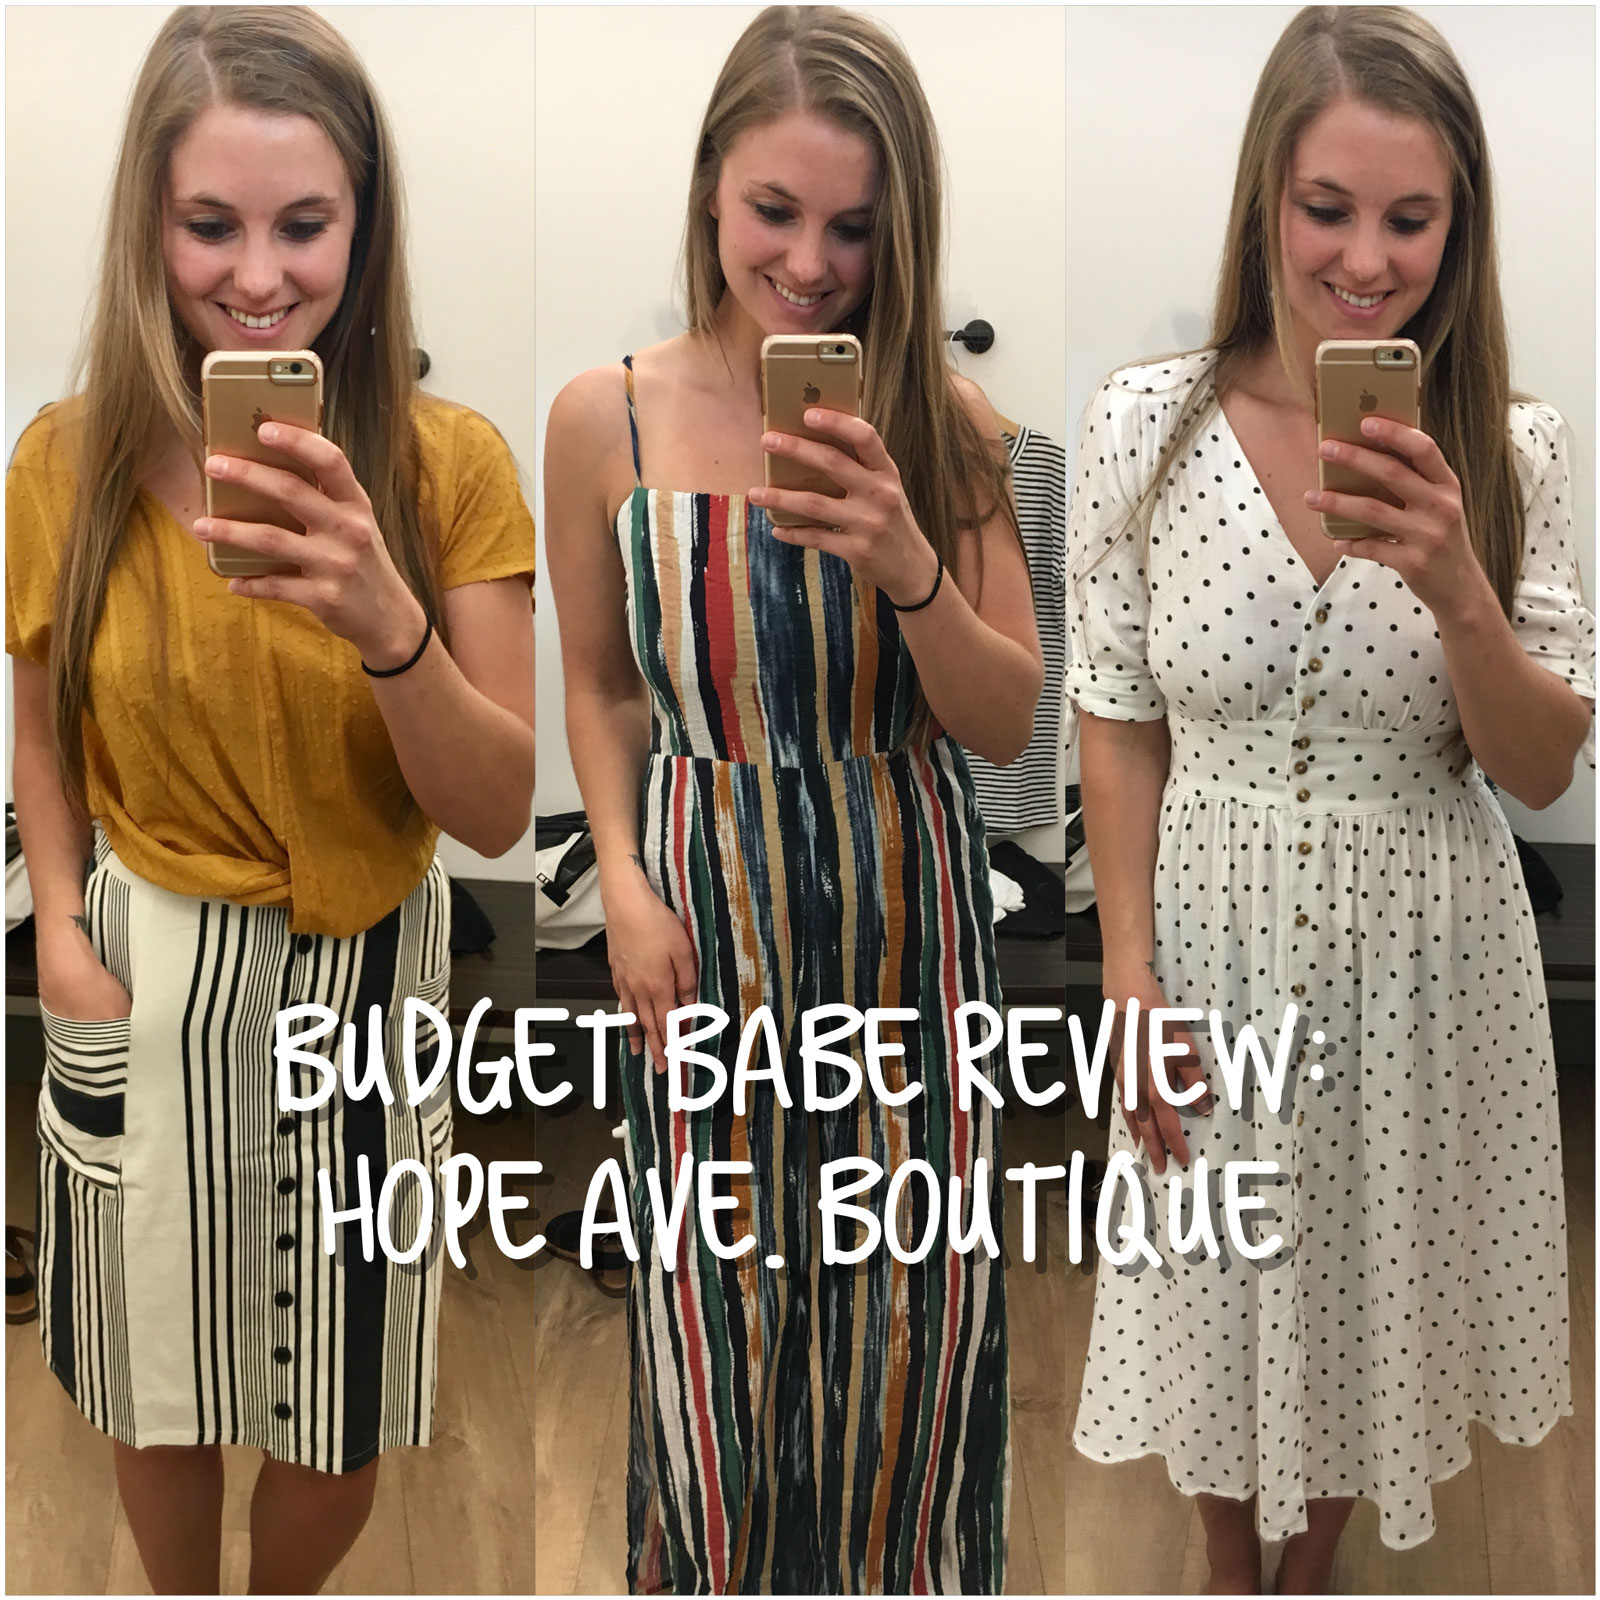 Budget Babe Review: Hope Ave. Boutique